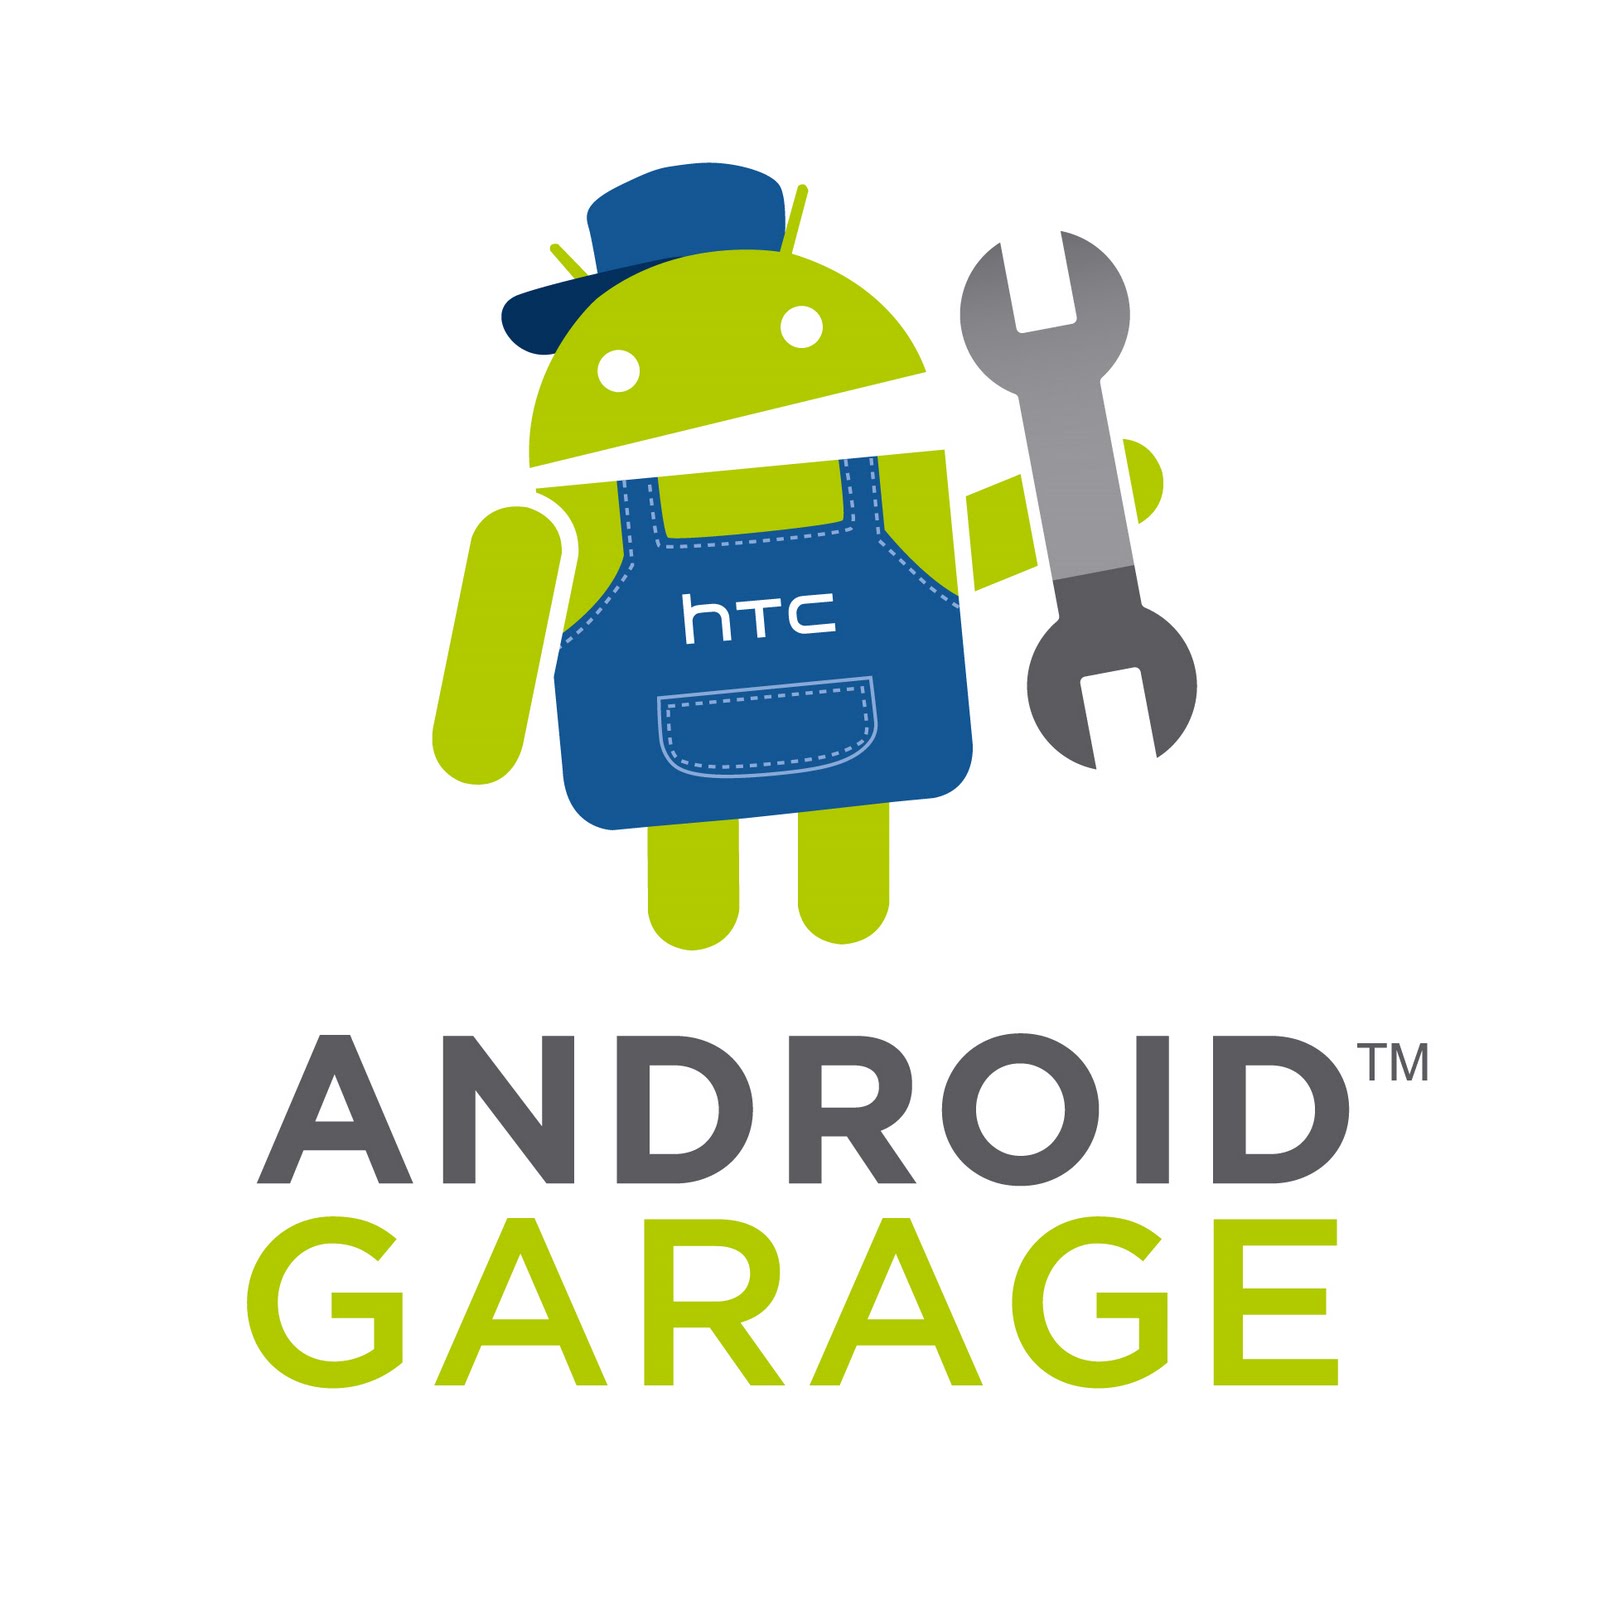 Android Garage - HD Wallpaper 